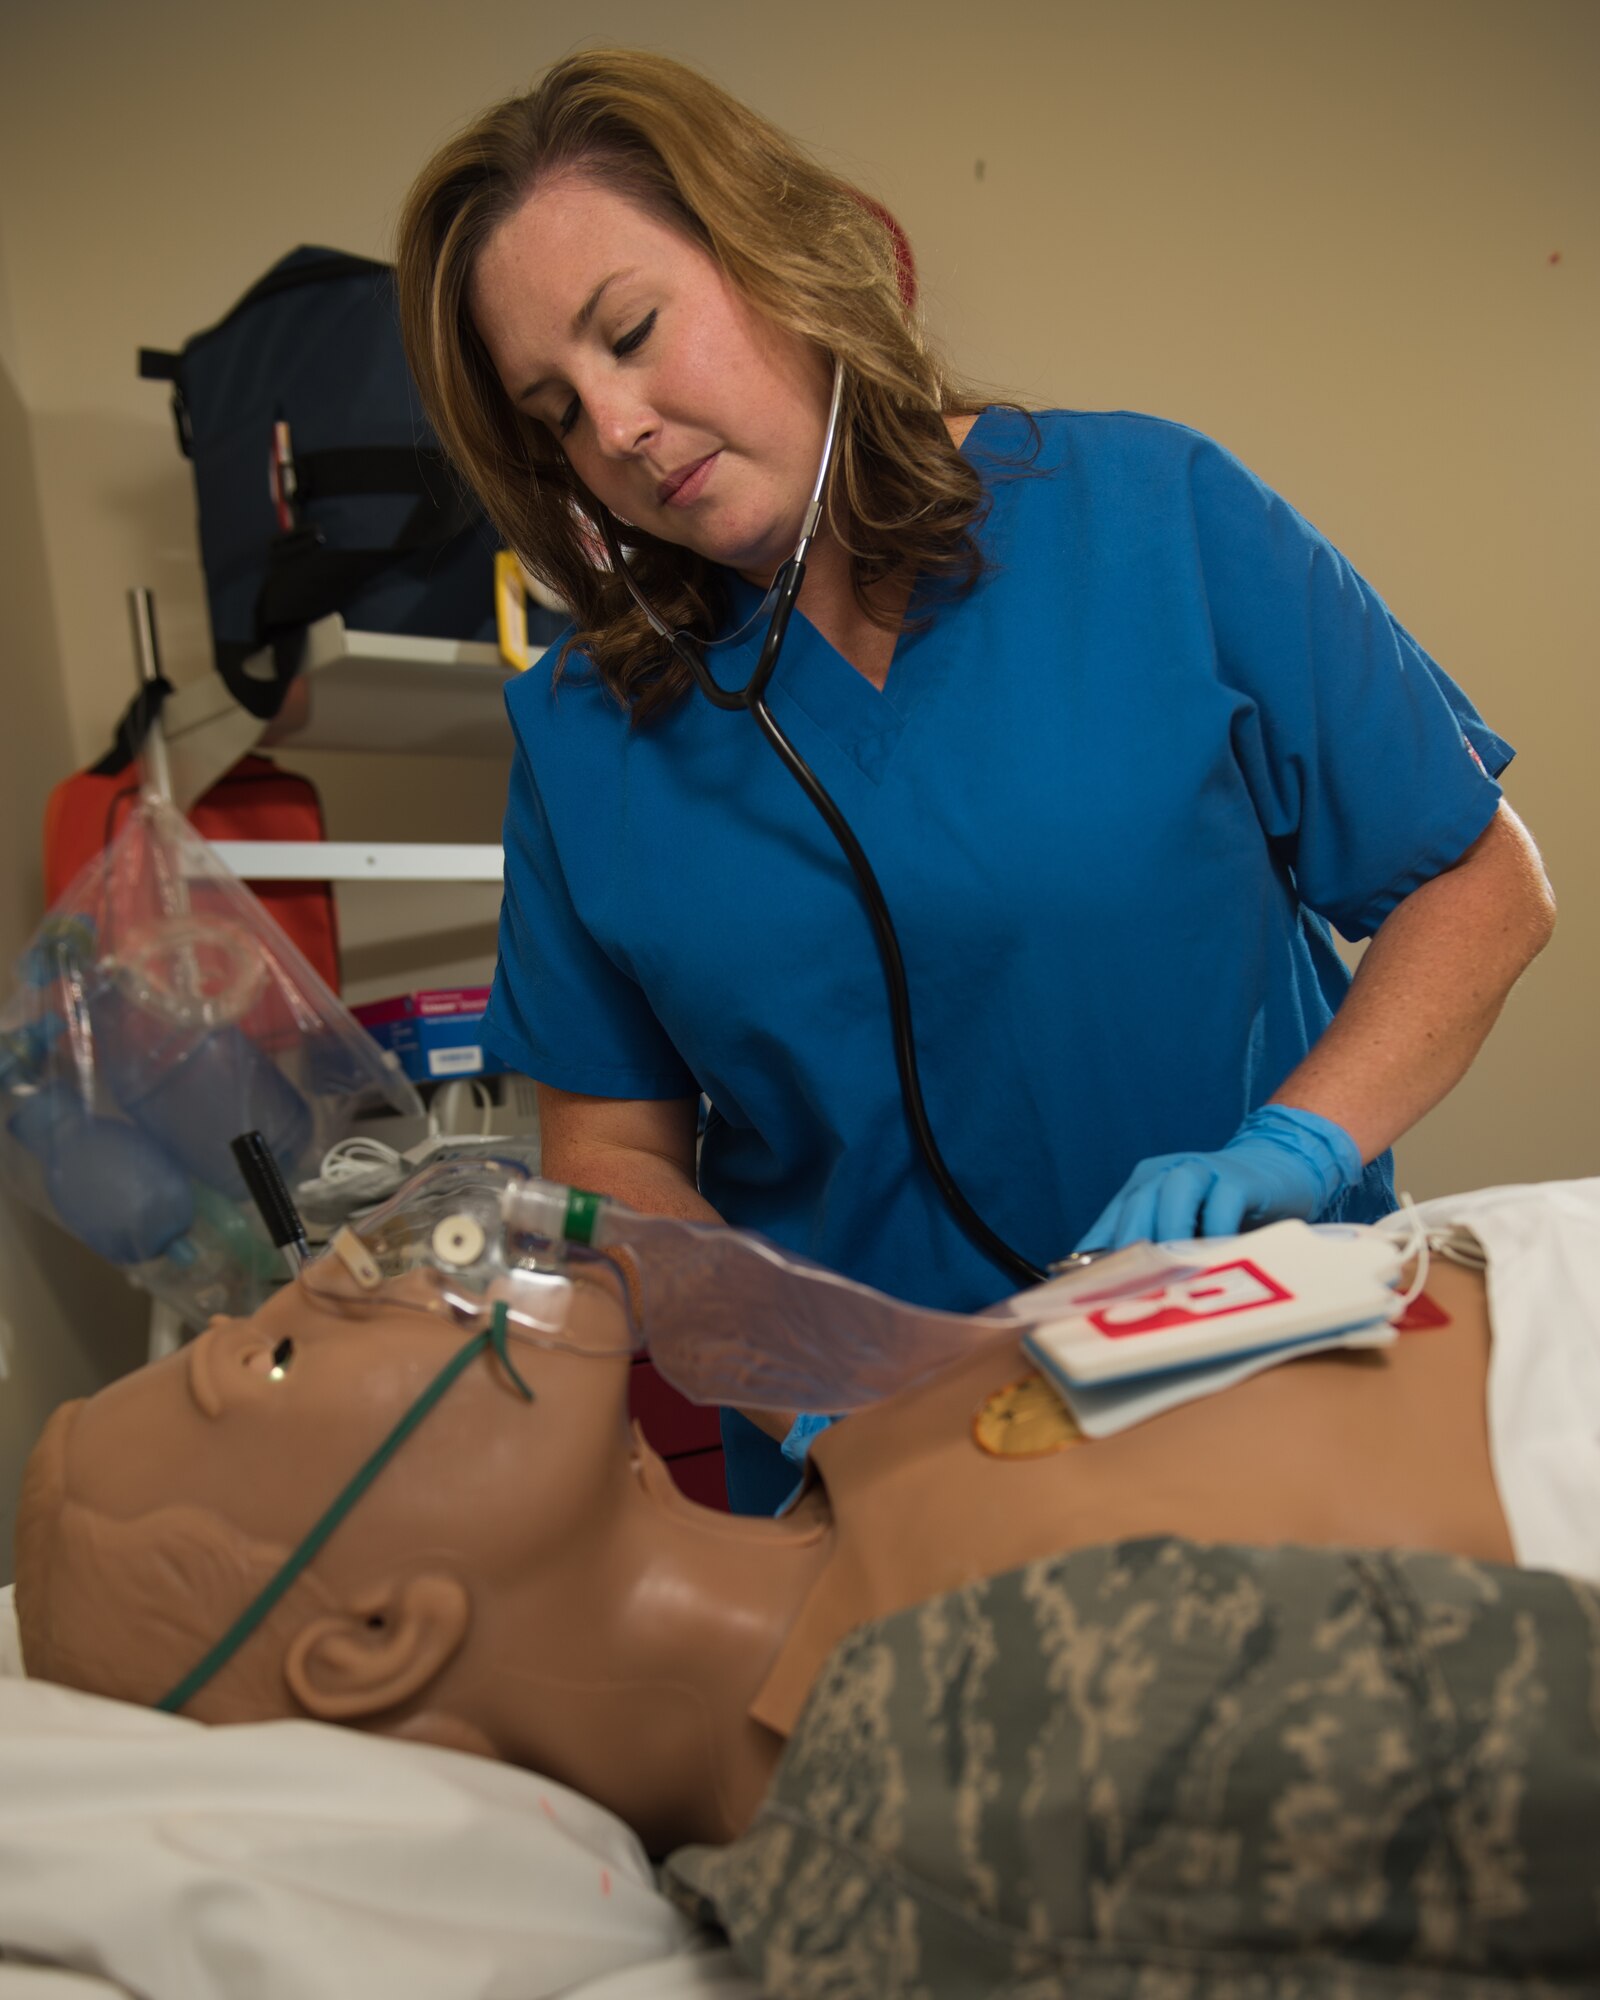 Lauren Nicholson, a 509th Medical Operations Squadron registered nurse, uses a stethoscope to listen to the heartbeat of a training dummy May 6, 2020, at Whiteman Air Force Base, Missouri.